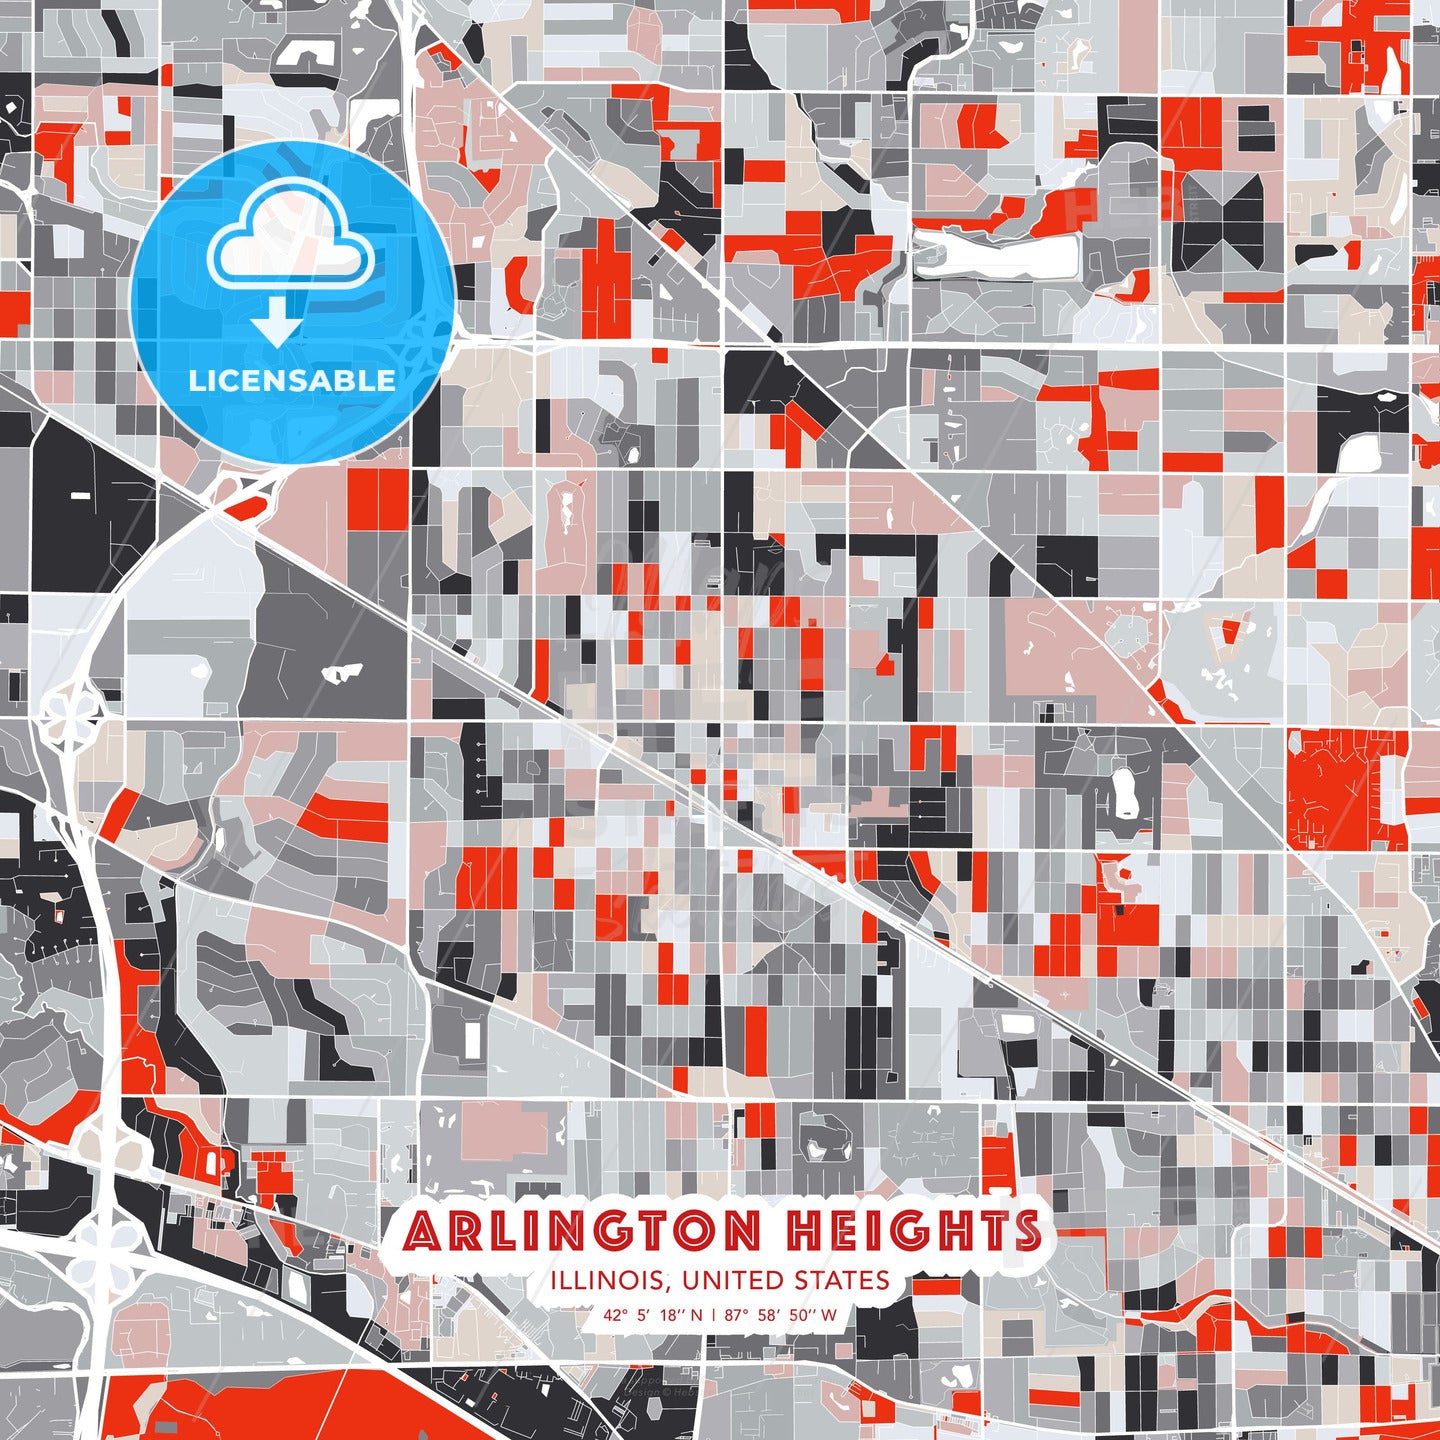 Arlington Heights, Illinois, United States, modern map - HEBSTREITS Sketches